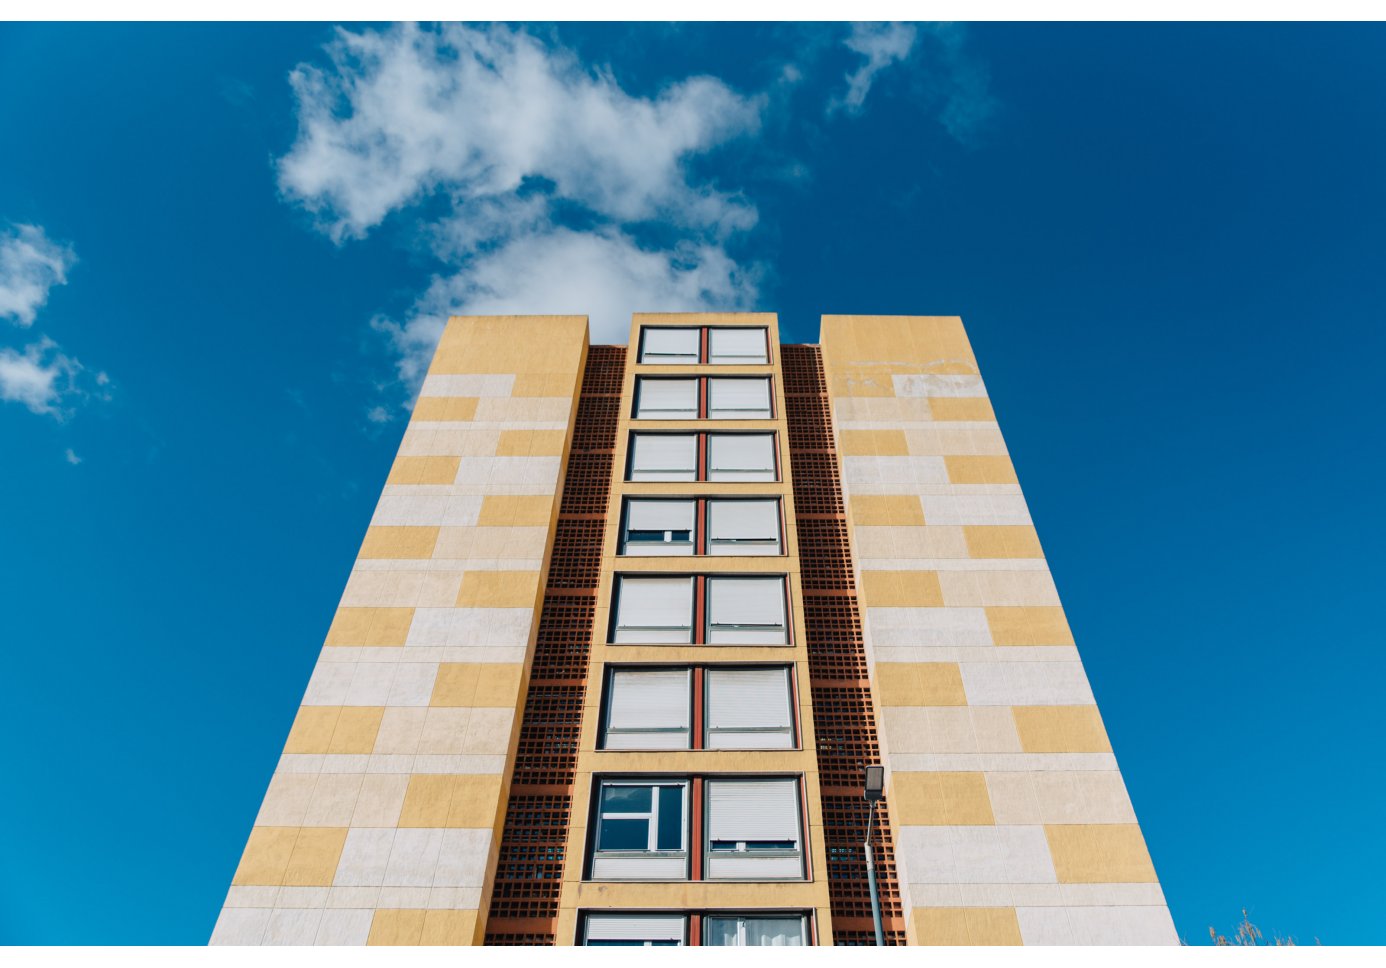 a tall building with orthogonal composition, blue sky above.